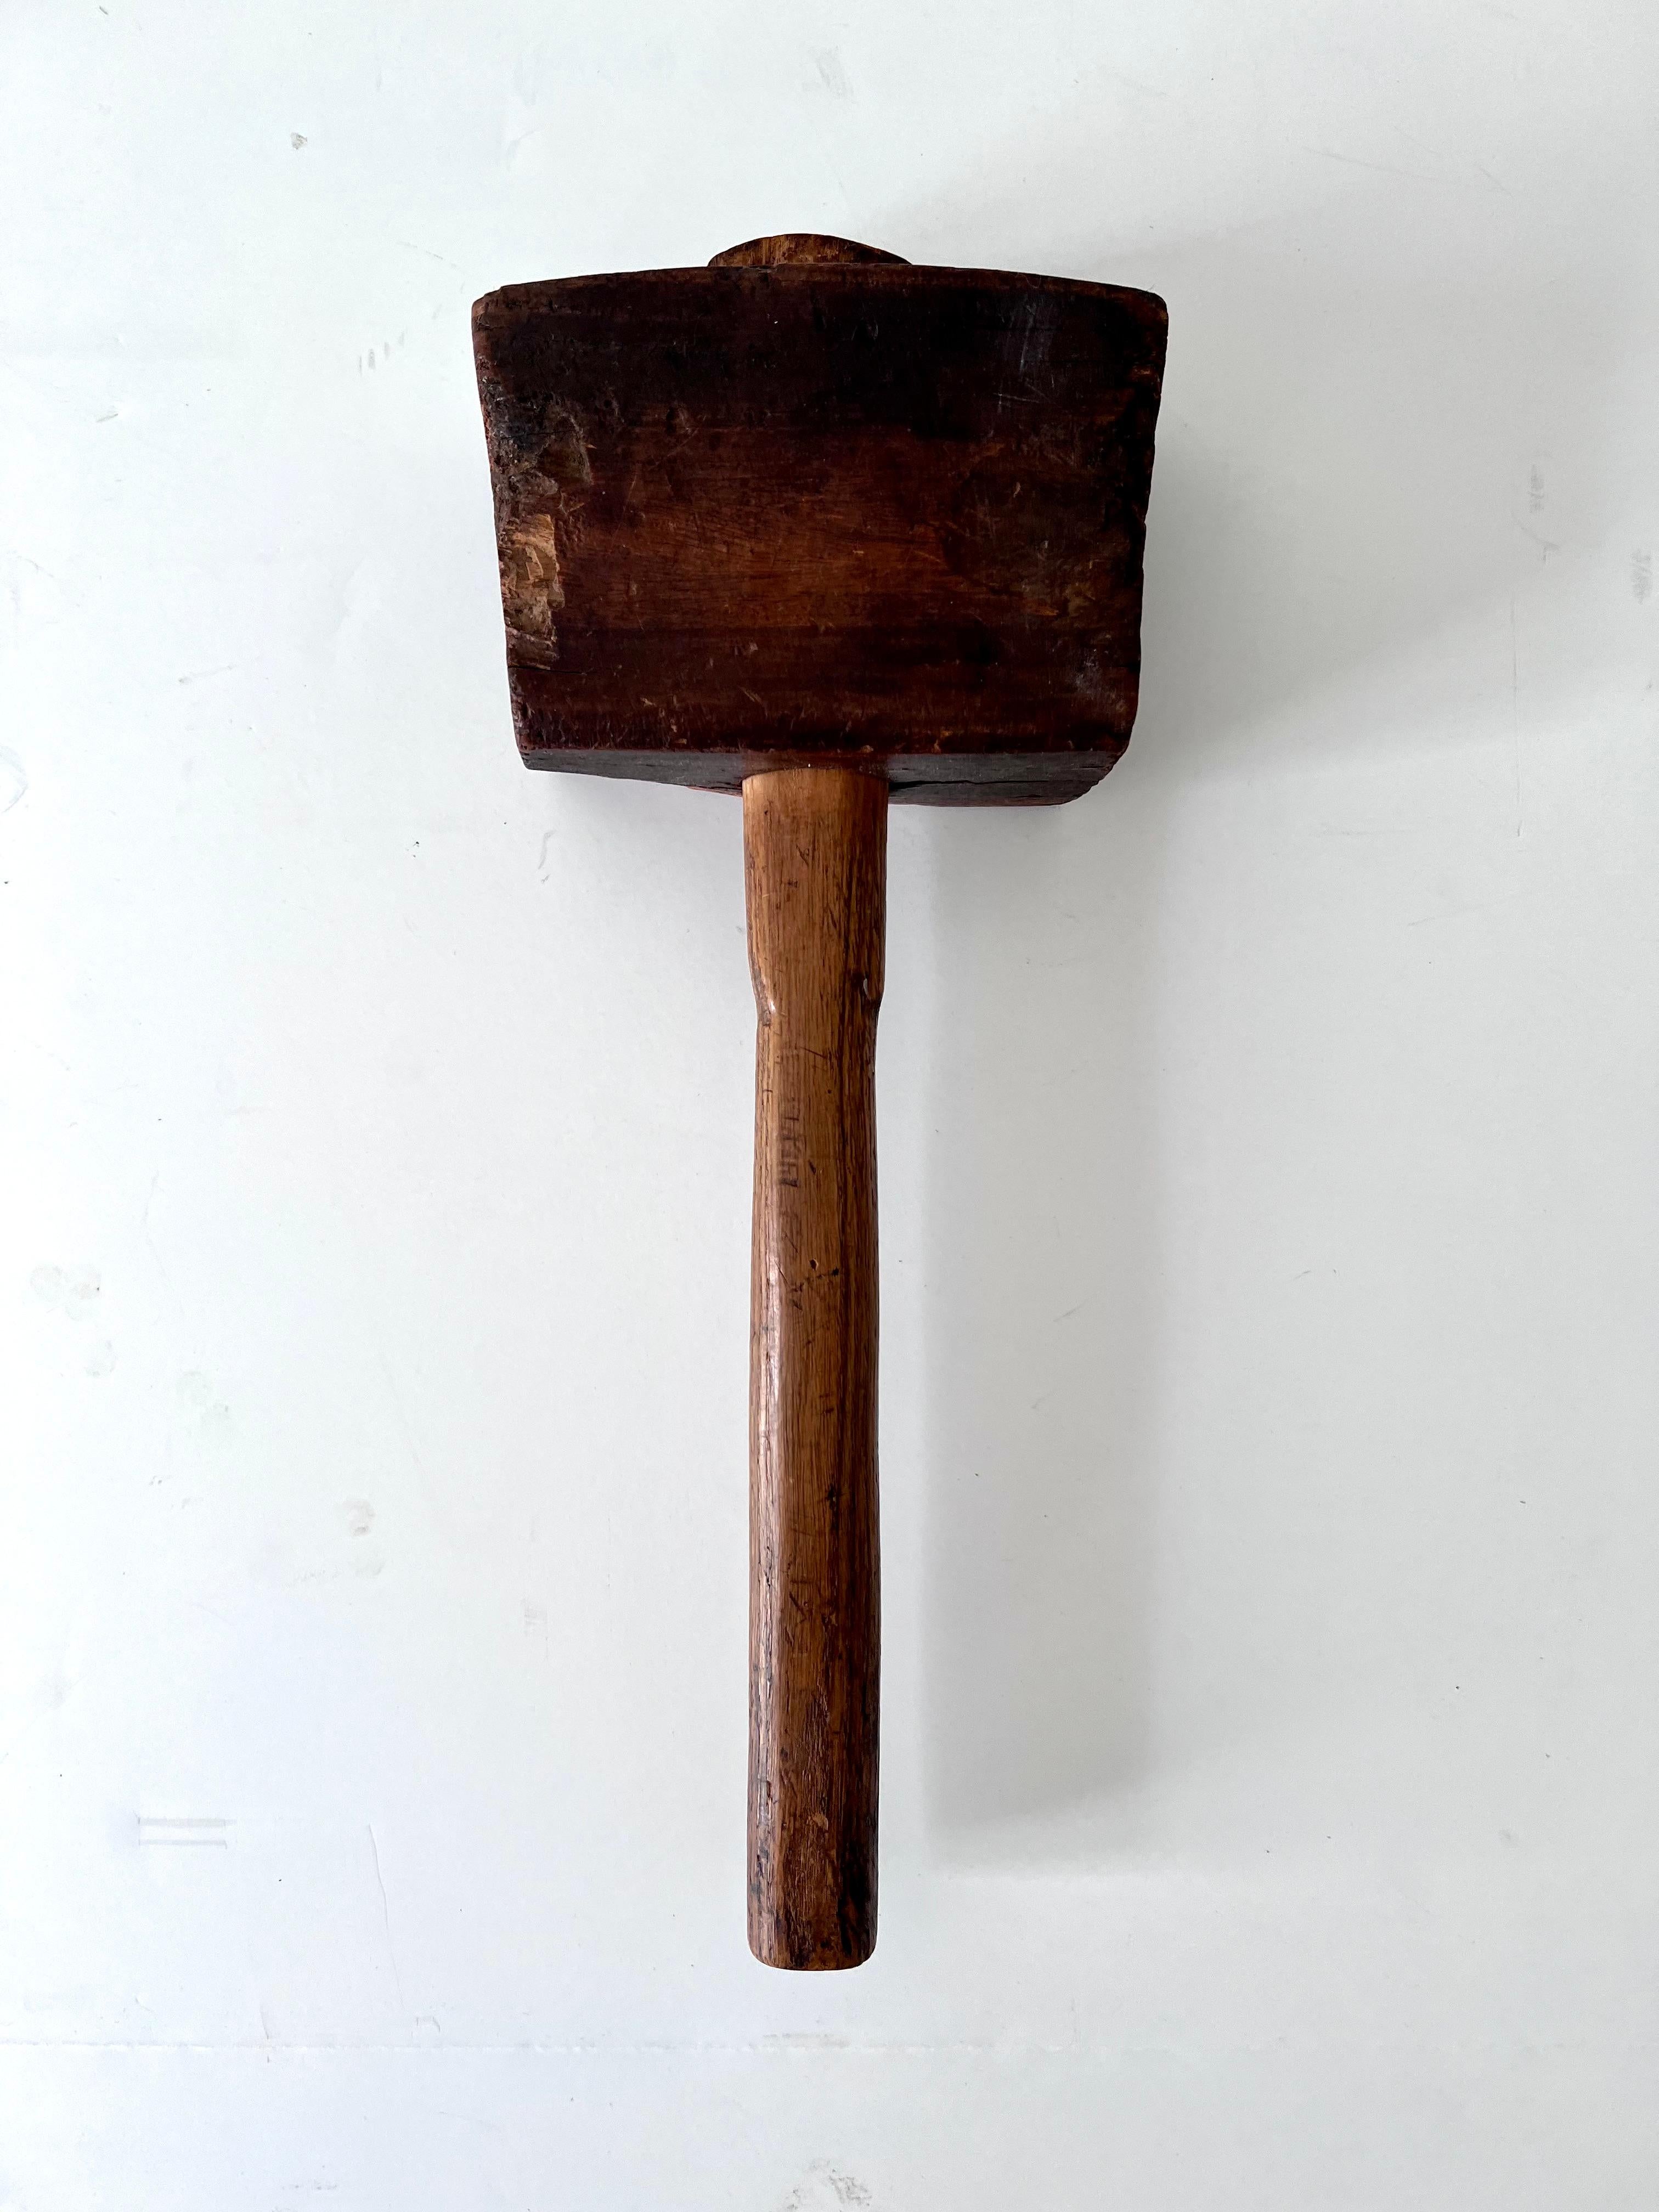 Unique in shape with a square head, a hand carved and crafted mallet works wonderfully well for those house hold chores, from tapping in a dowel, to working chicken for the perfect chicken Paillard. Also a great decorative piece or paperweight at